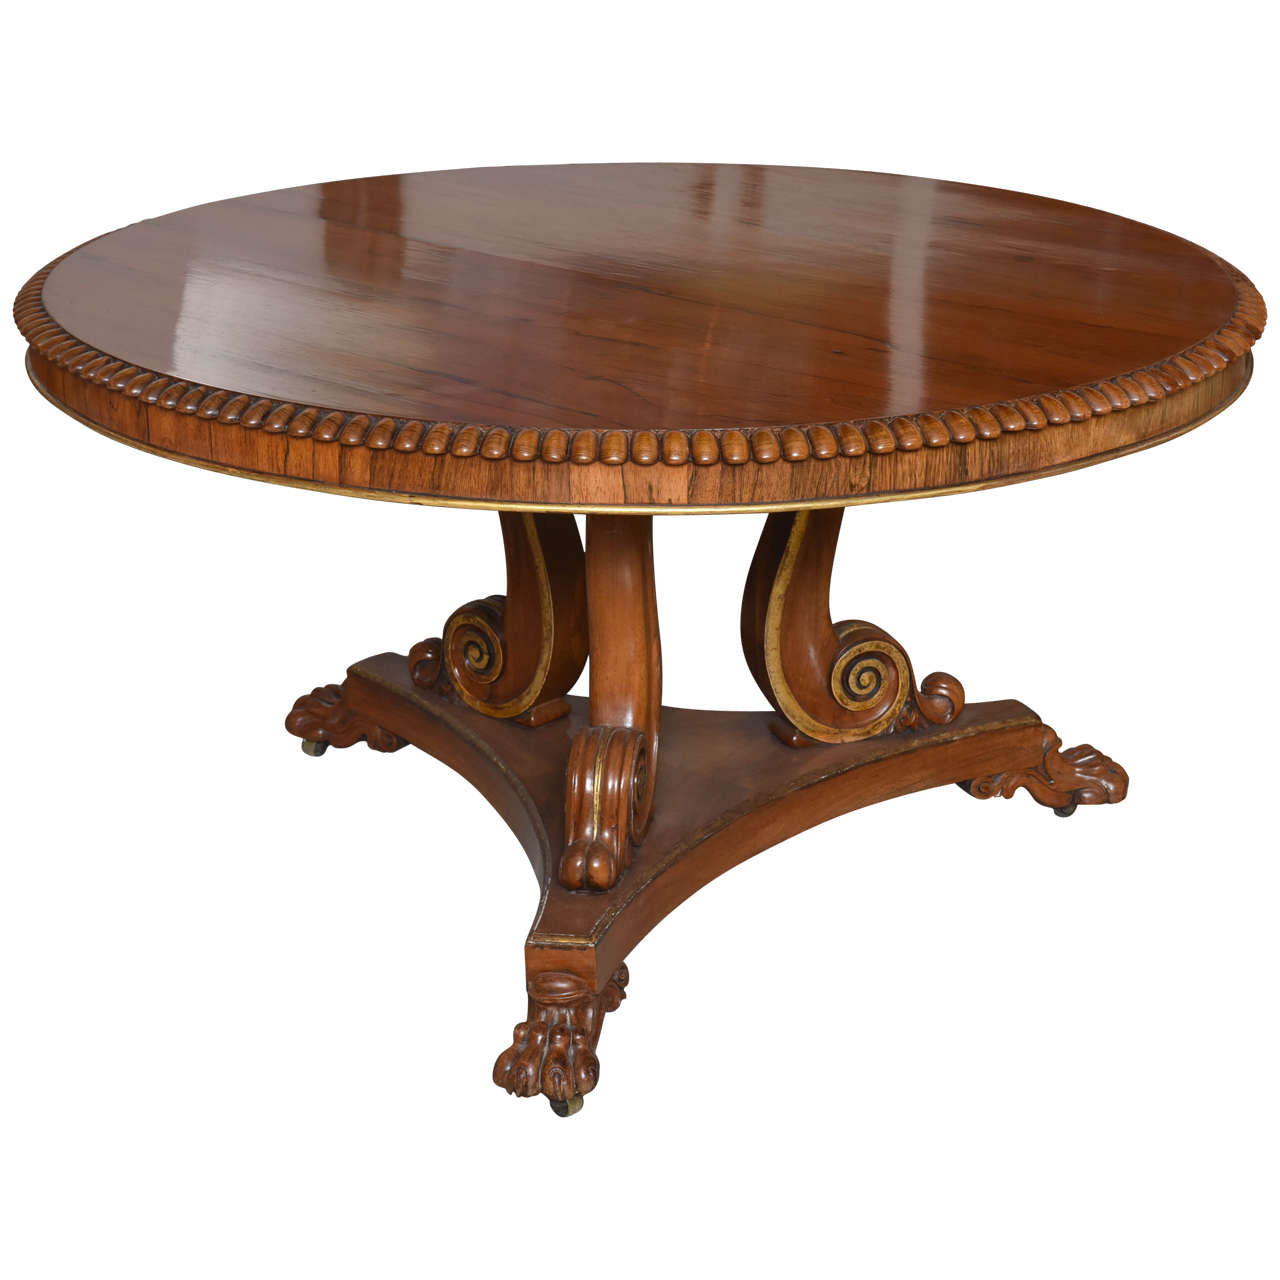 English Regency Circular Palisander and Parcel-Gilt Centre or Breakfast Table